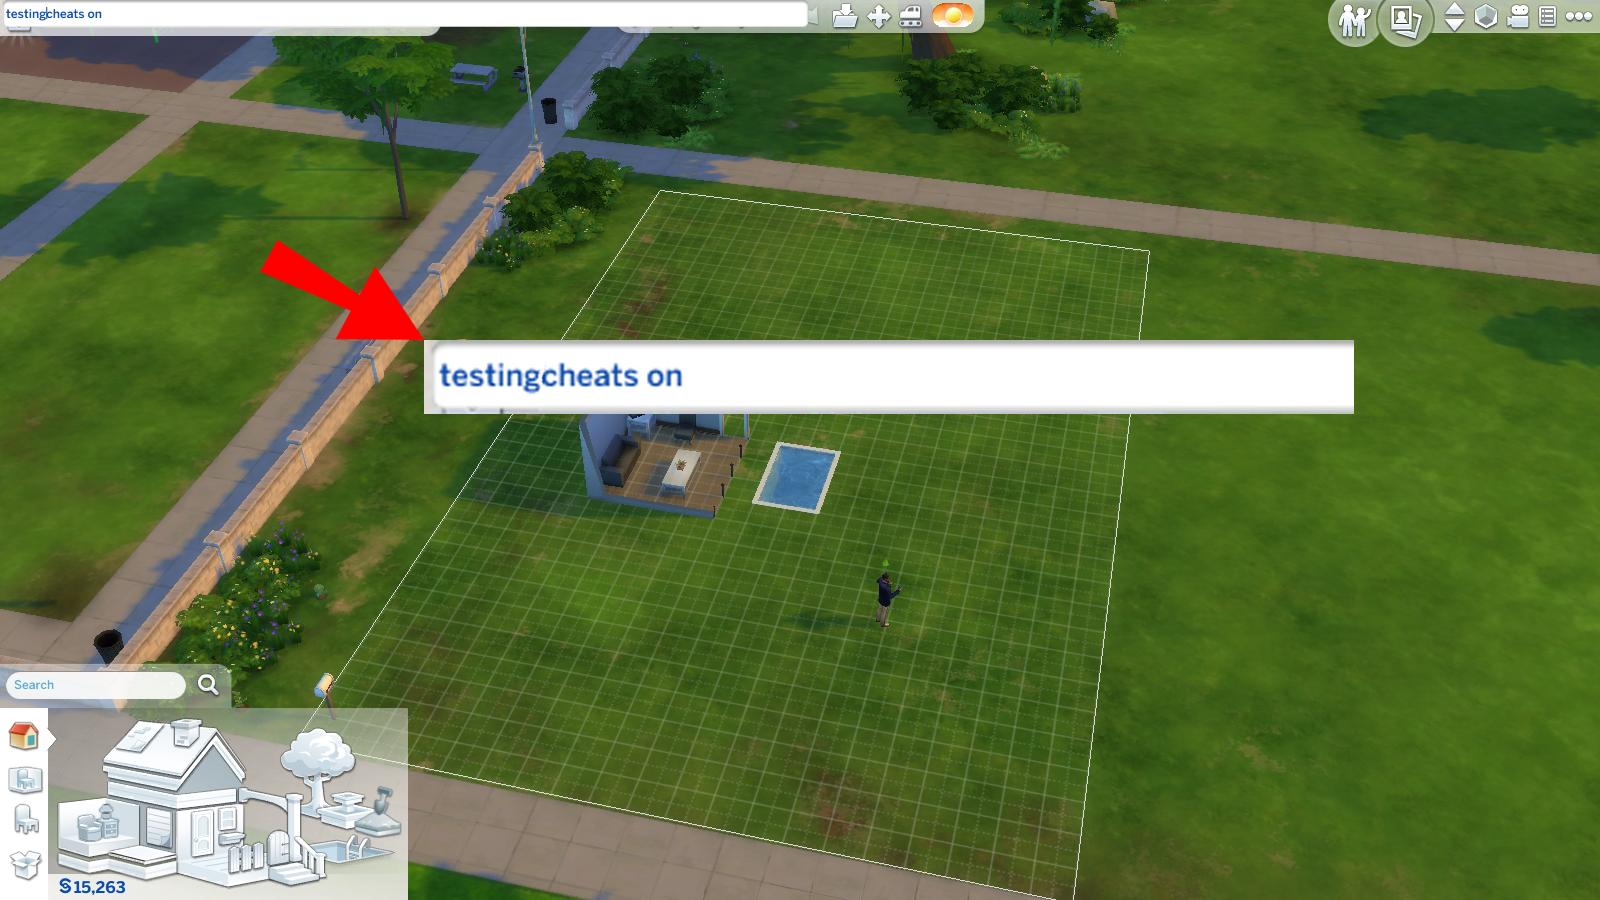 droom eer consultant How to Enable Cheats in Sims 4